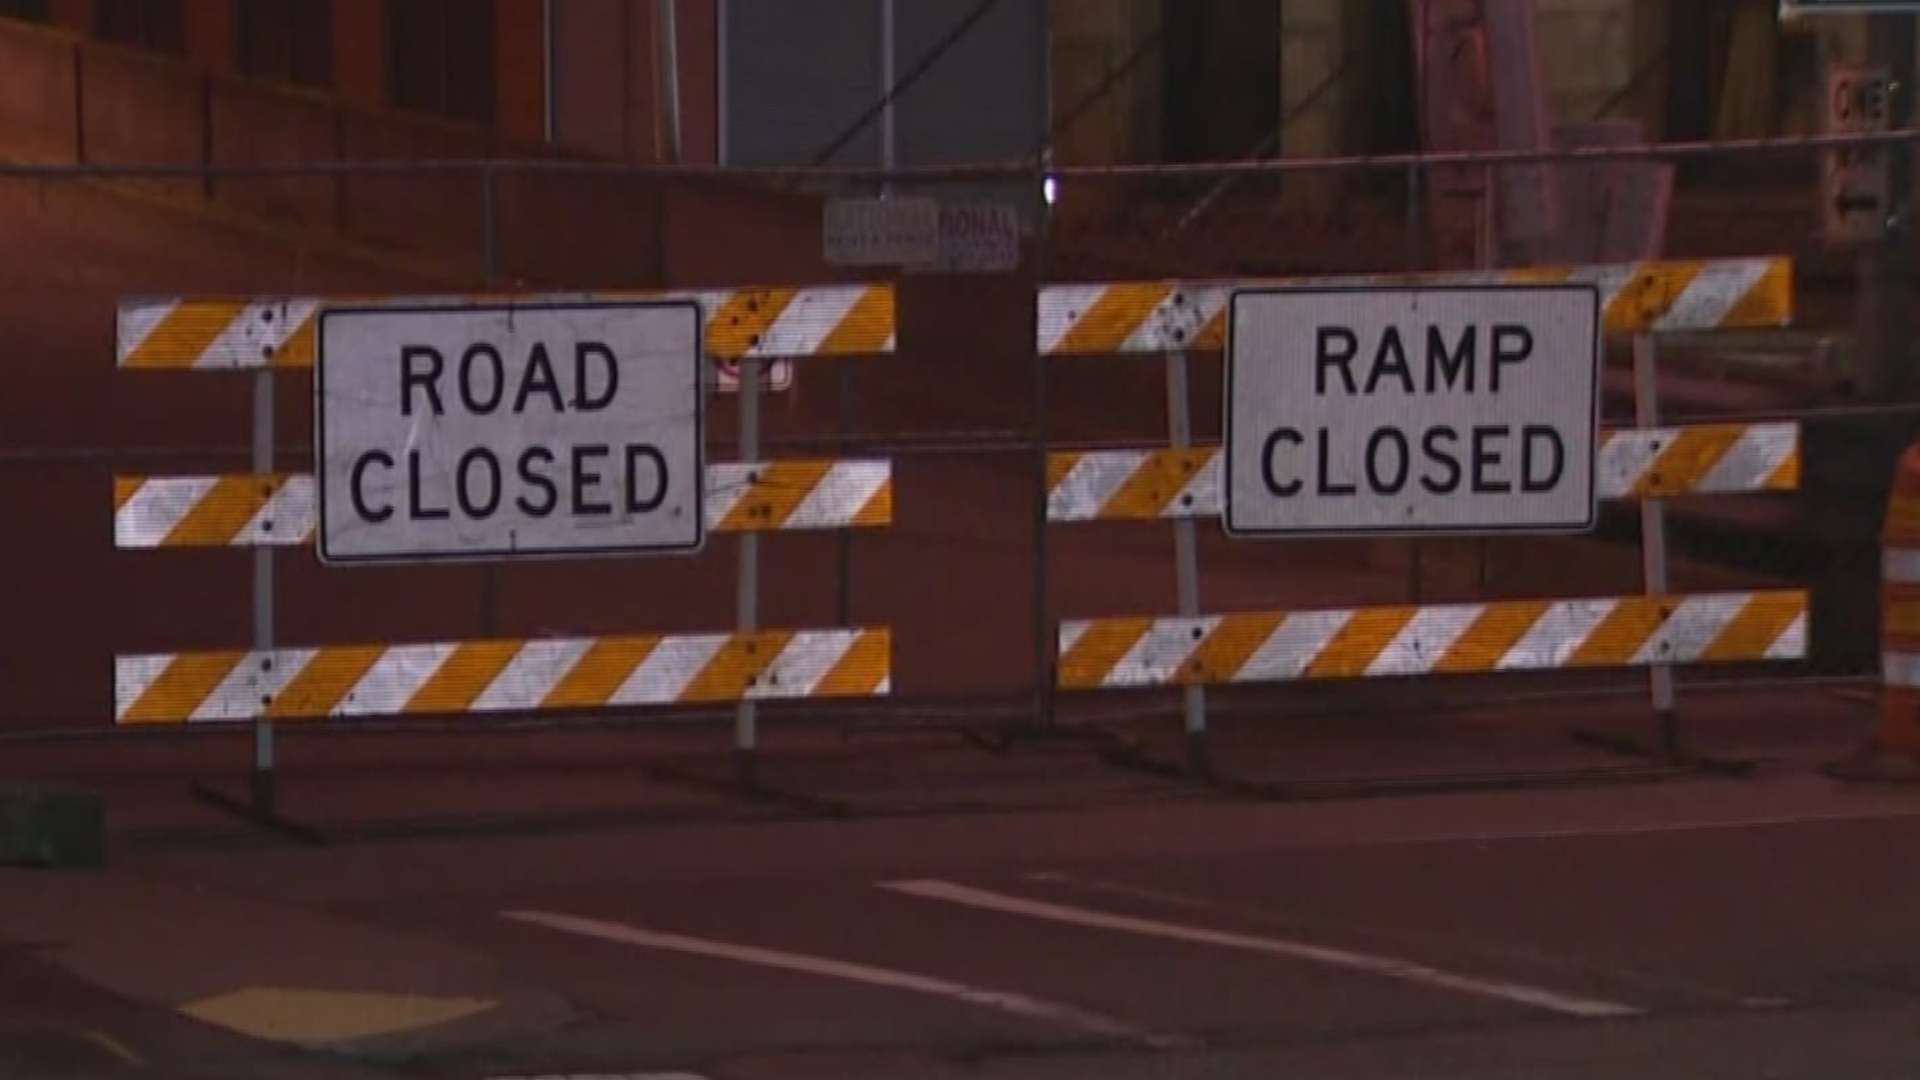 Seattle’s Alaskan Way Viaduct closed forever at 10 p.m. on January 11, 2019. The new State Route 99 tunnel under Seattle that will replace the viaduct is expected to open in early February.